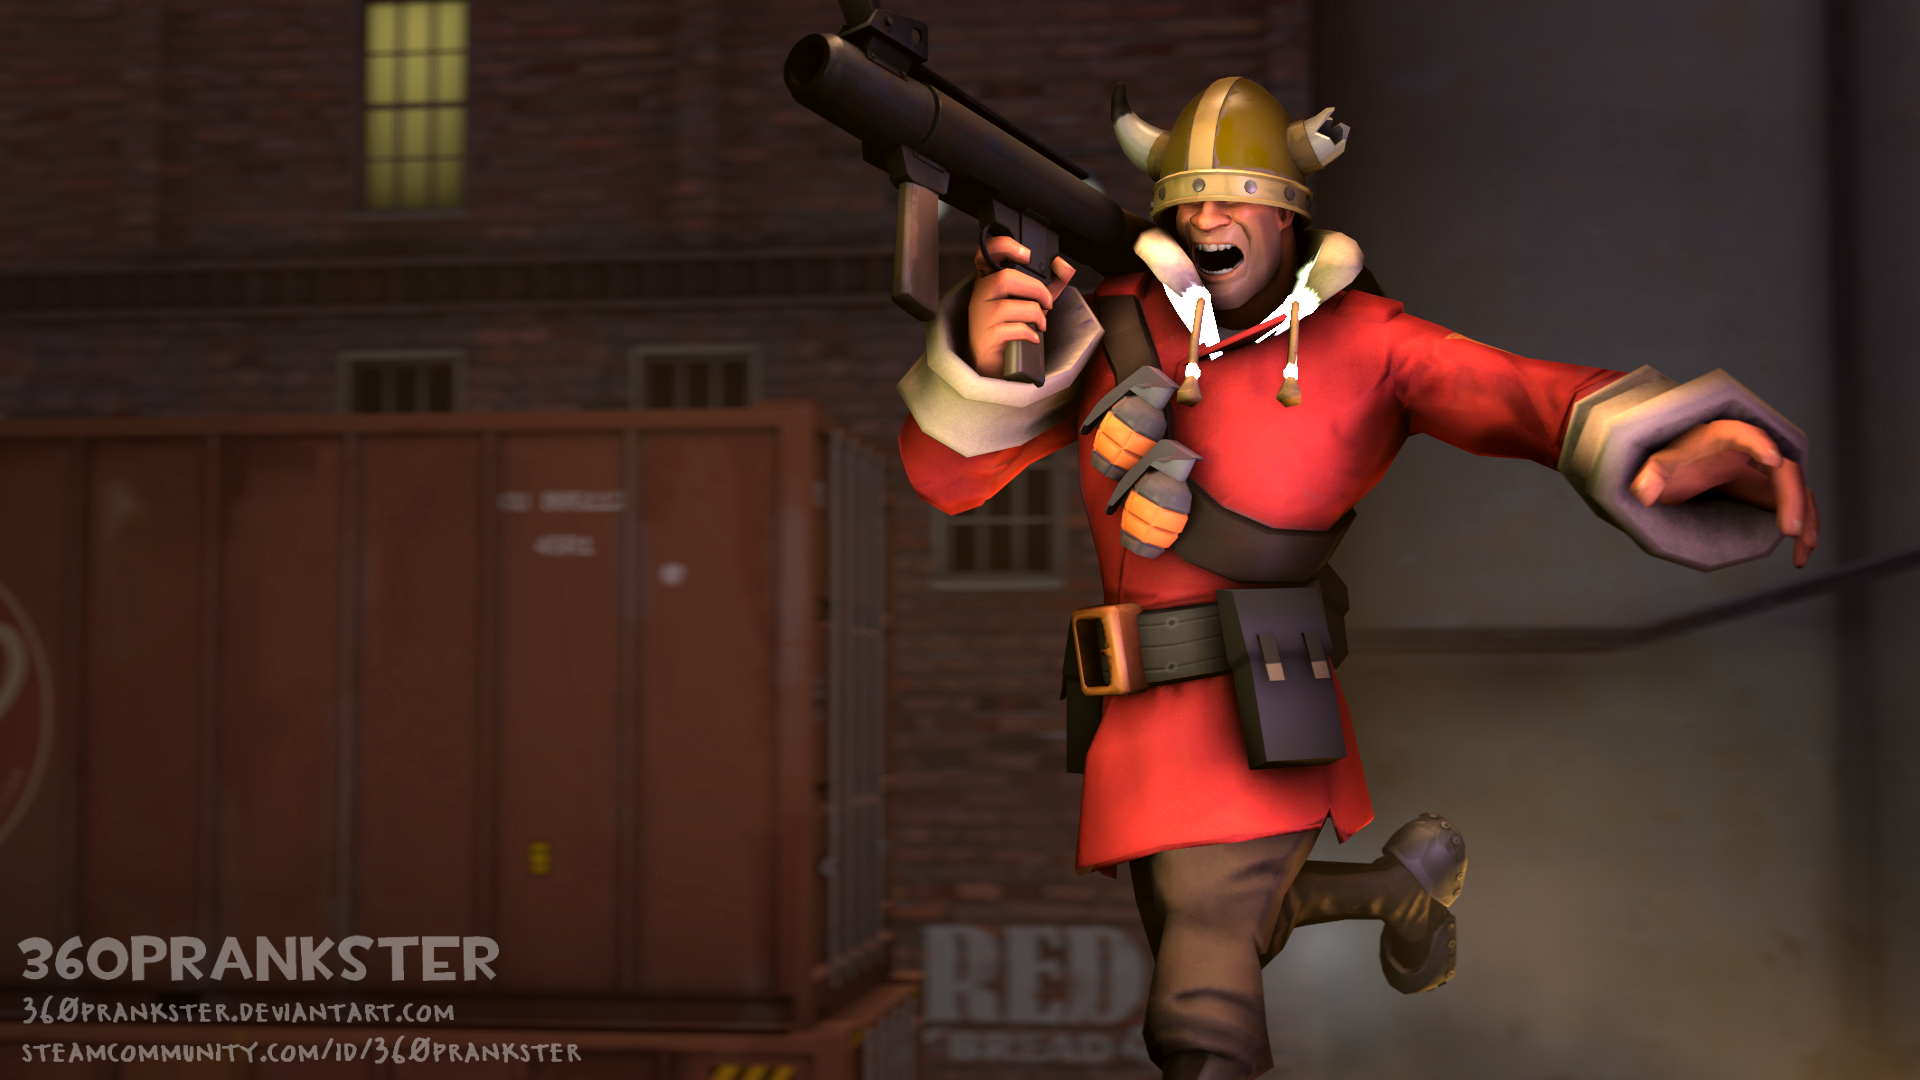 Sfm Tf2 Loadout Soldier Ignistf2 By 360prankster